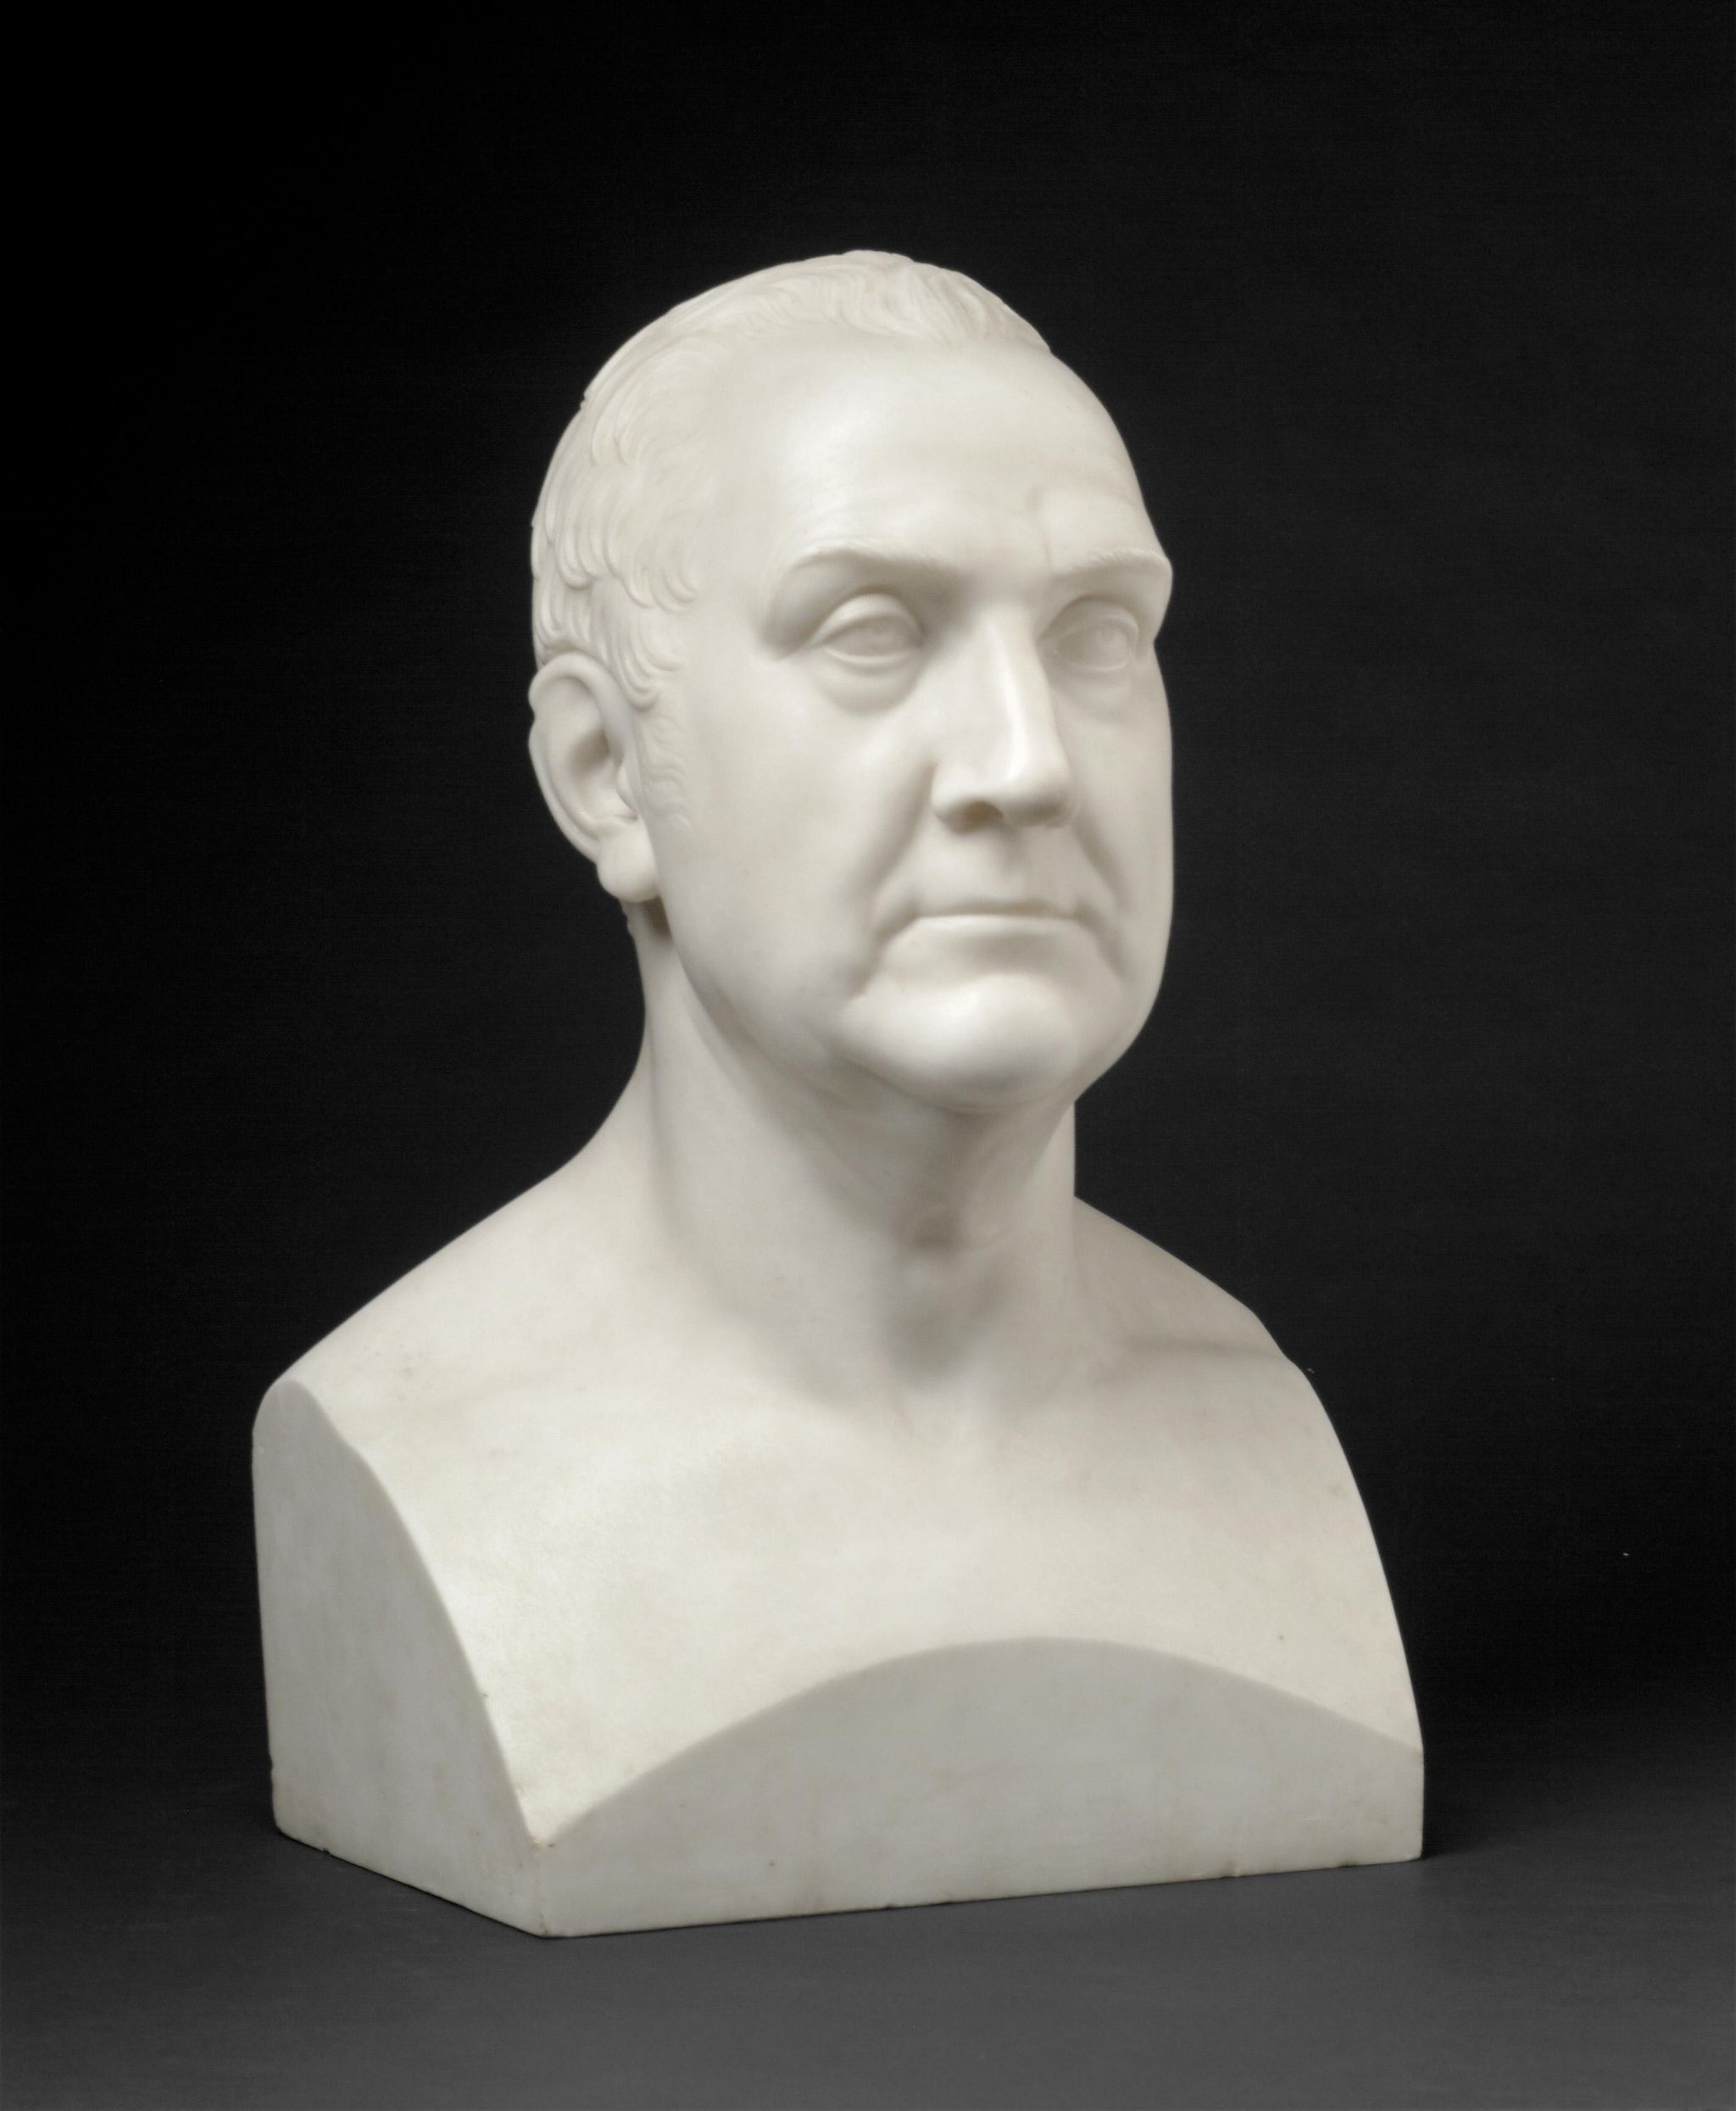 Bust of Admiral Edward Pellew, later First Viscount Exmouth (1757 - 1833)